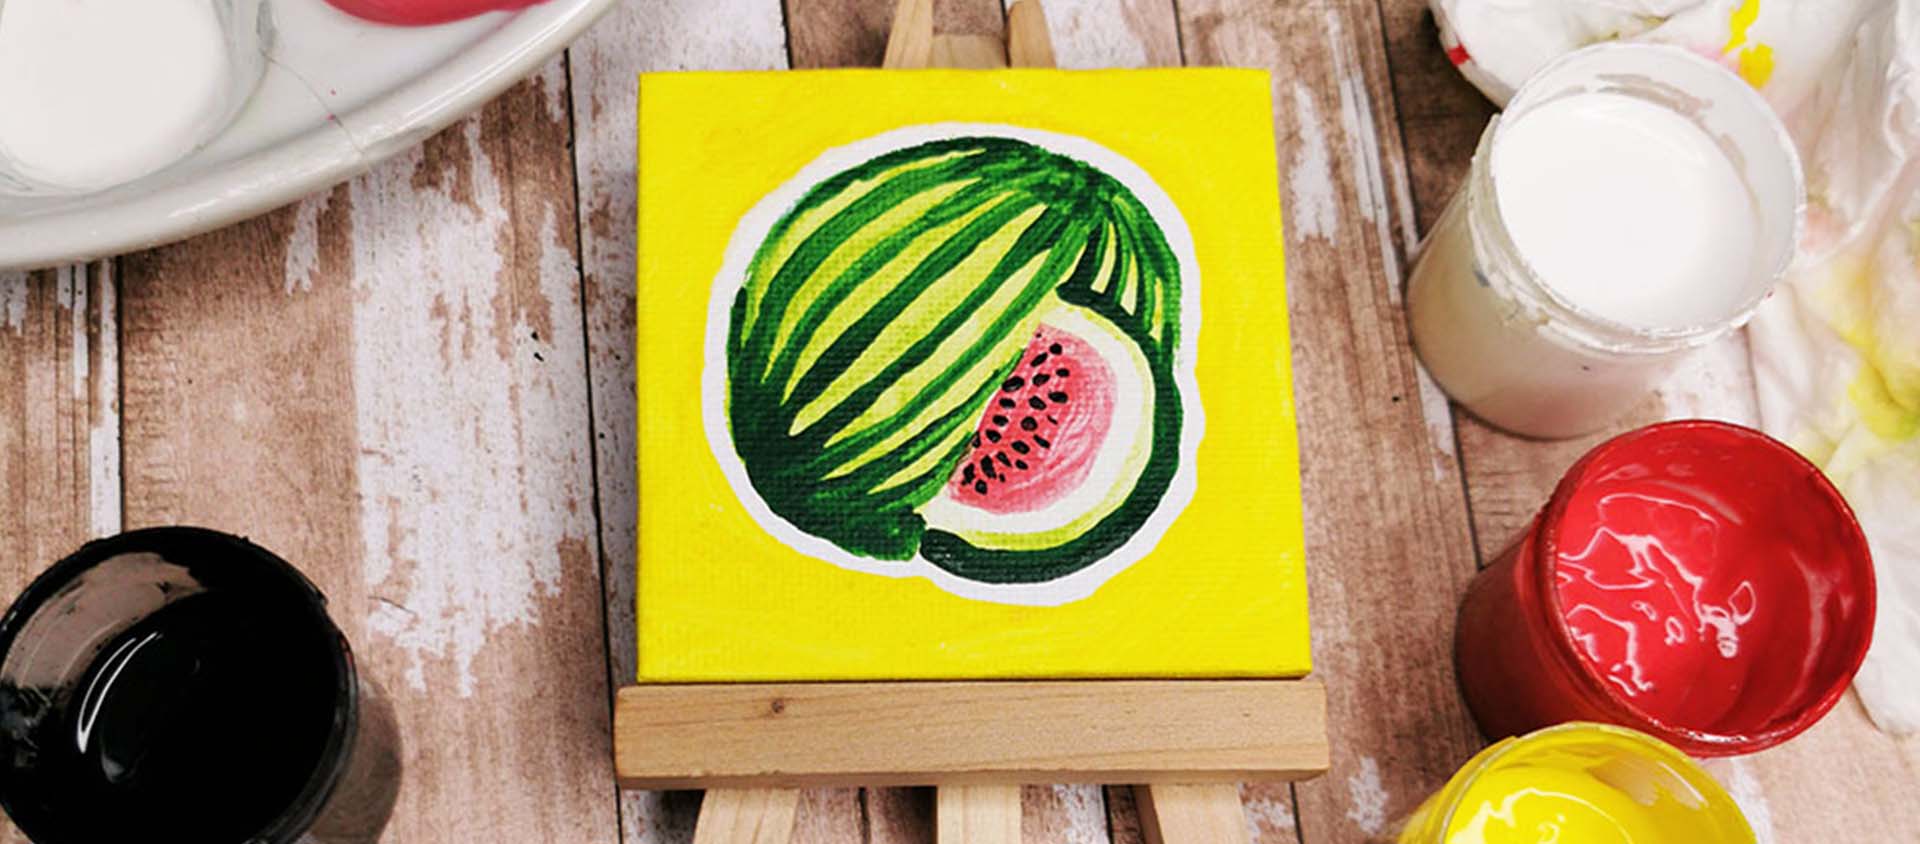 Learn how to paint a watermelon with Simply Gouache Paints by using this step-by-step guide created by Daler-Rowney artist Amylee Paris, and is easy for beginners to follow and explore using gouache!